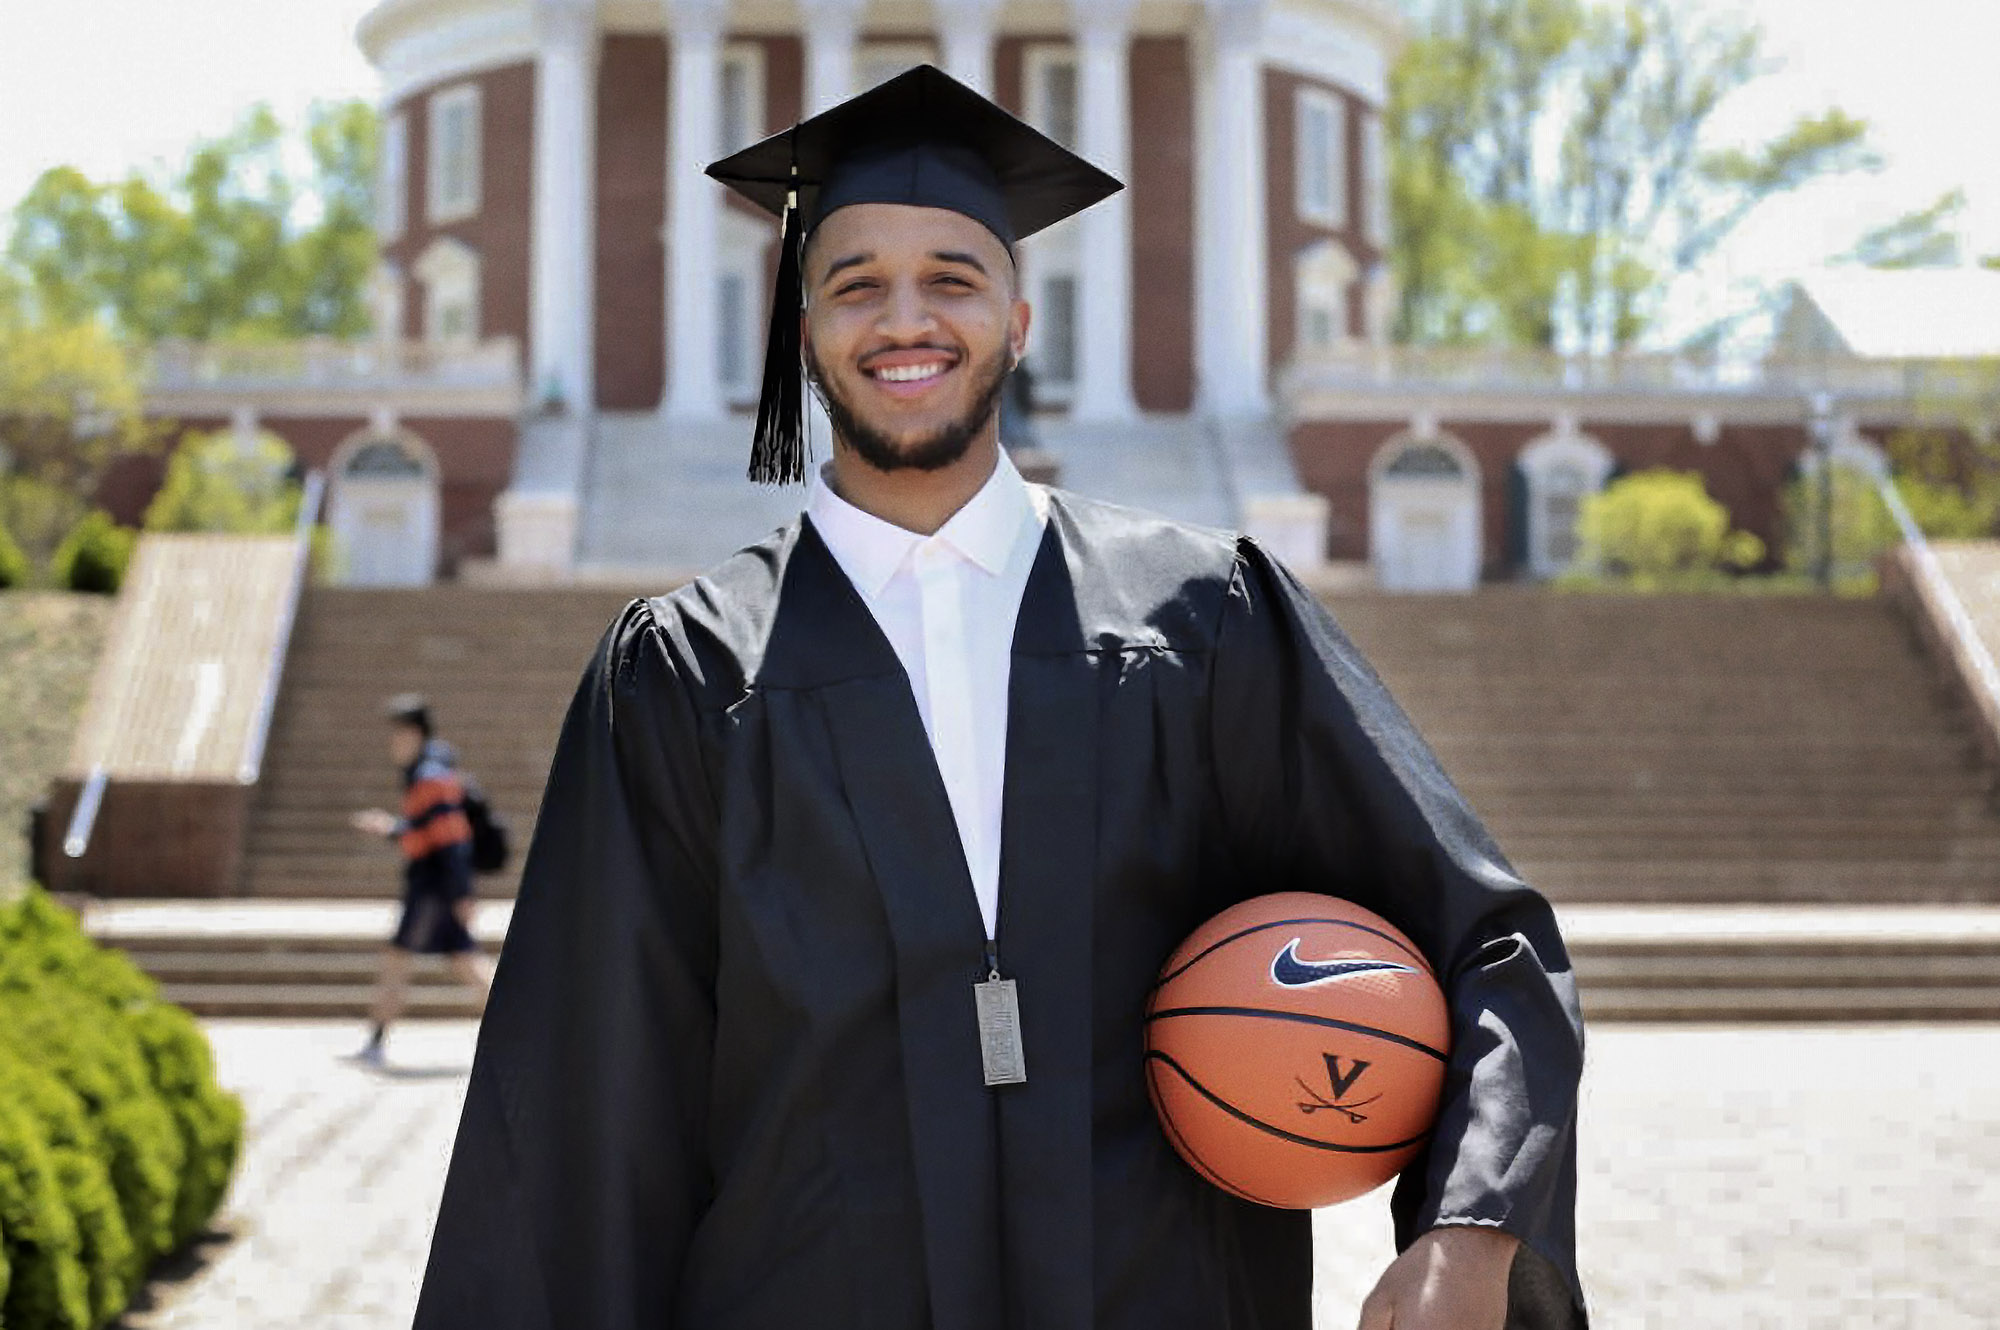 Isaiah Wilkins standing in graduation cap and gown holding a basketball in his left arm in front of the Rotunda for a picture